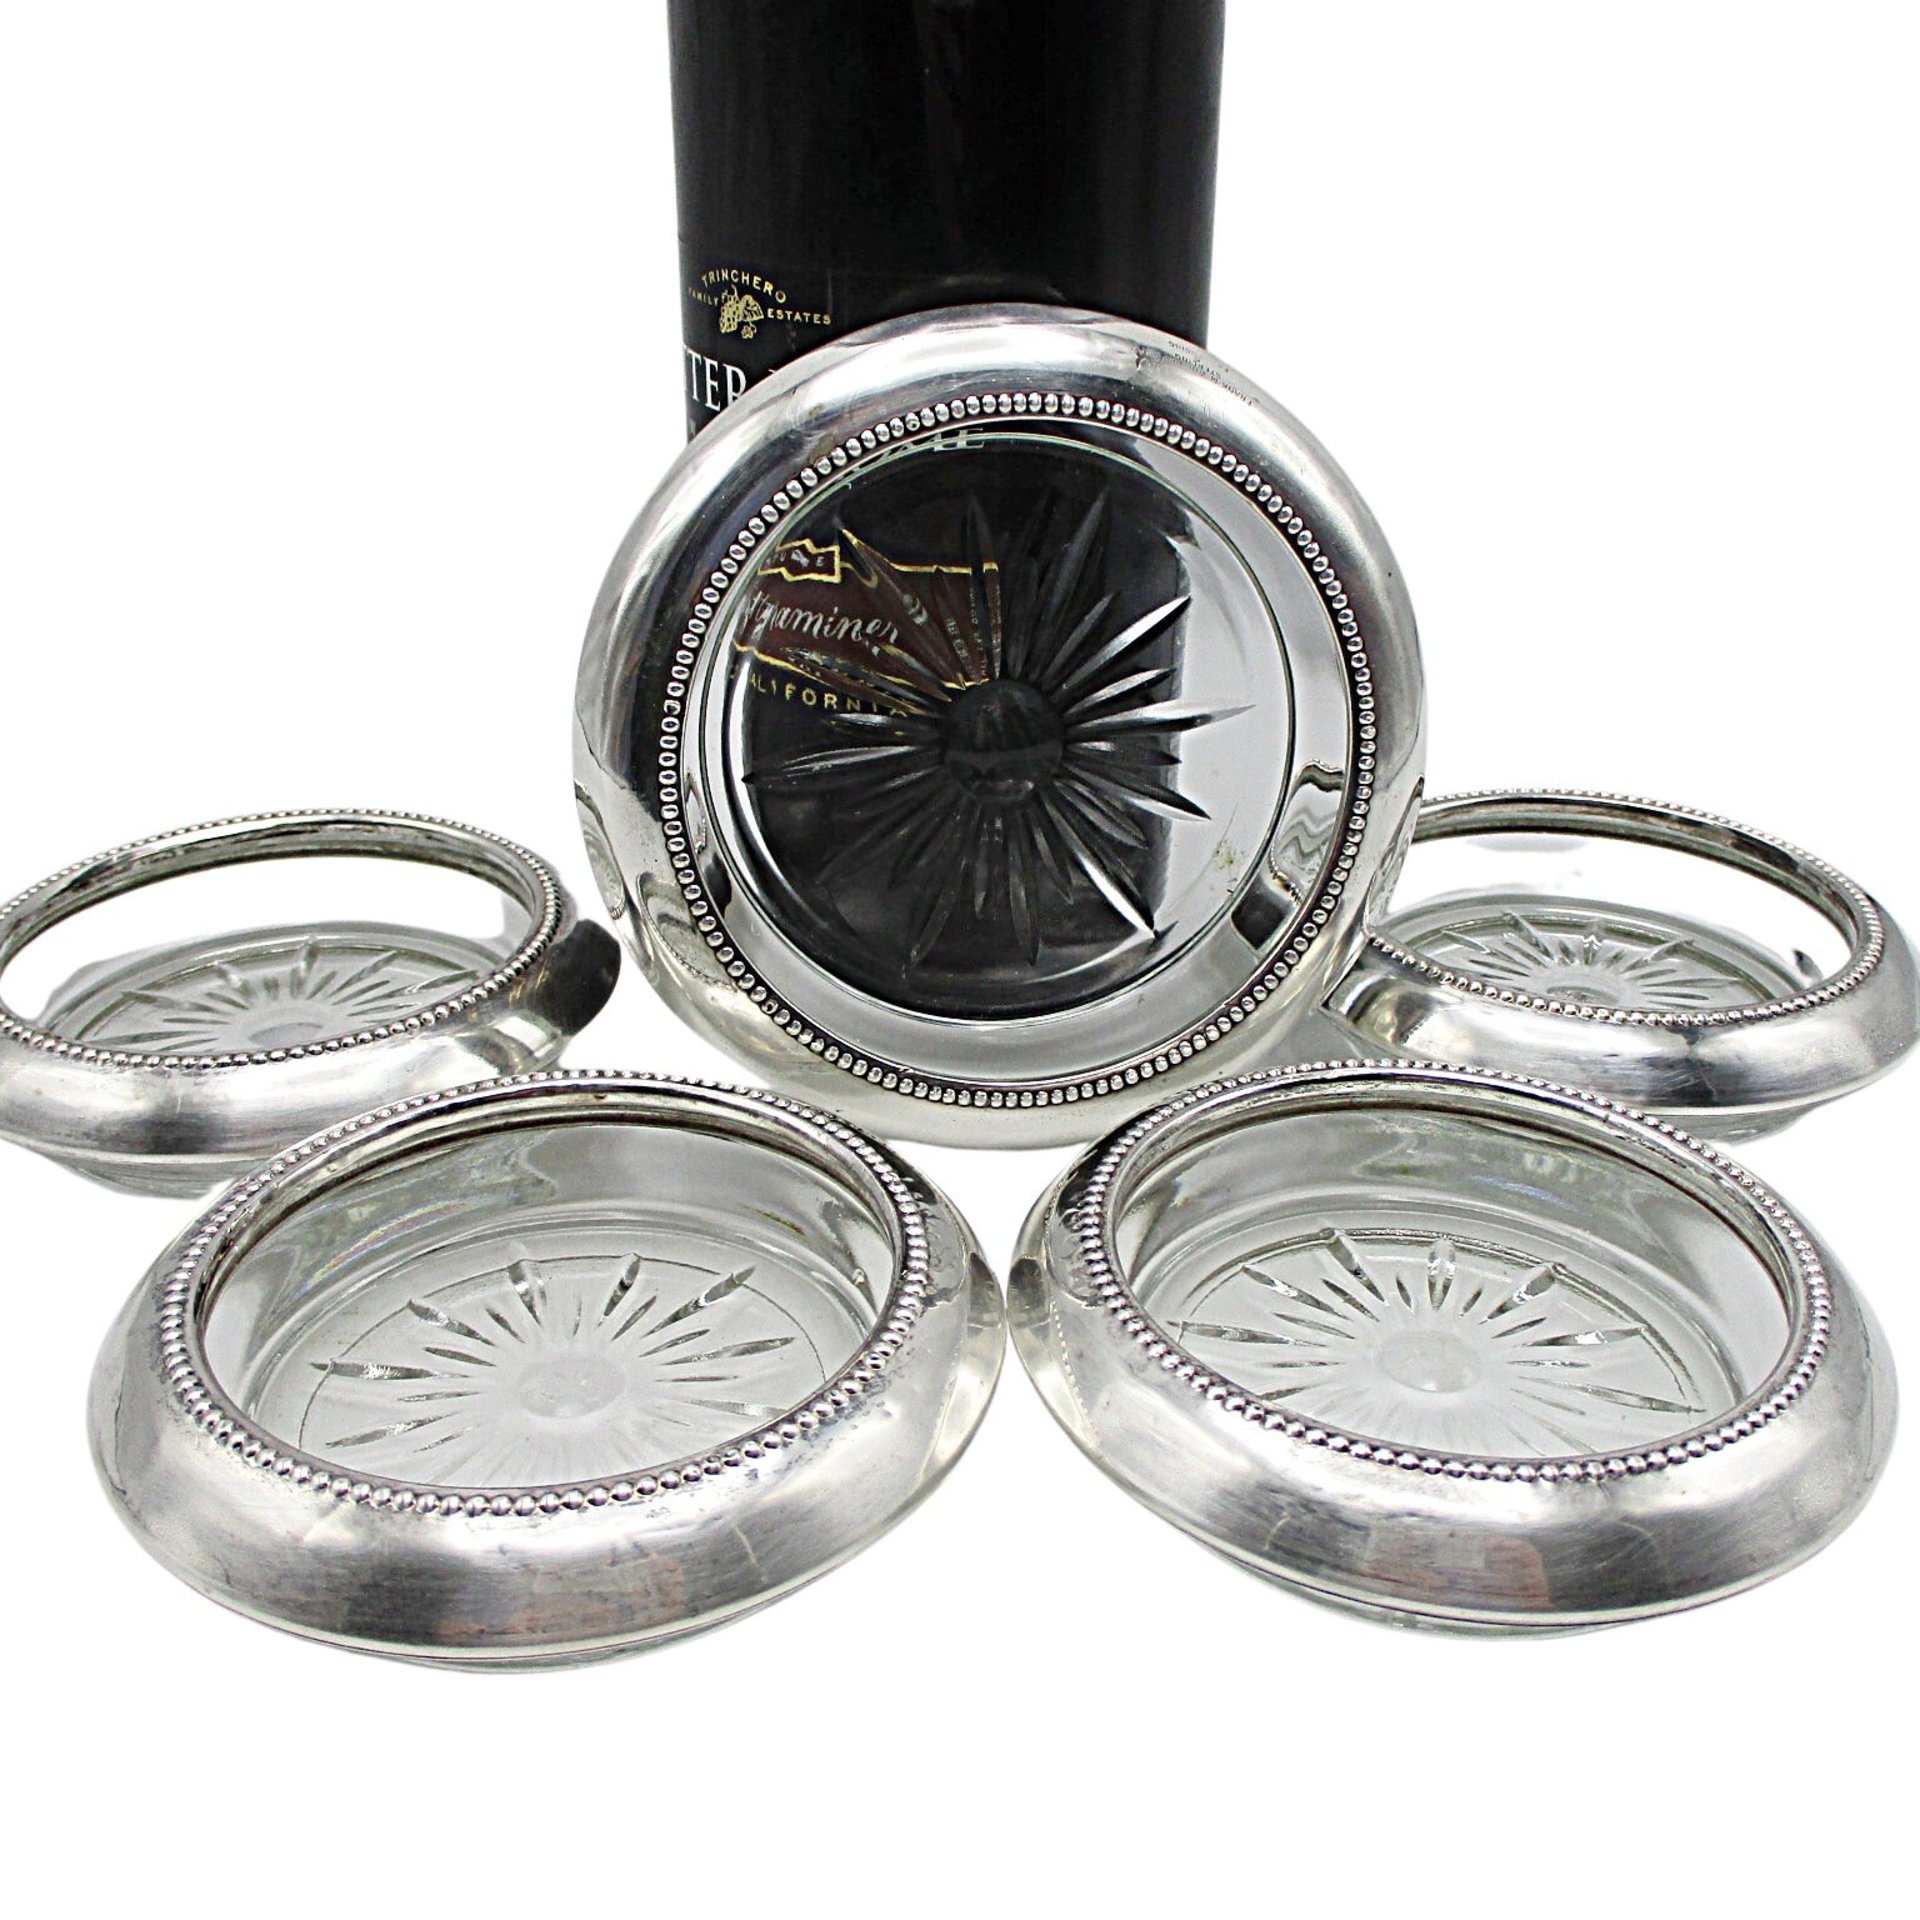 Sterling Silver Wine Bottle and Wine Glass Coaster Set, Starburst Glass, Frank Whiting, Sterling Rims, 5pc Set, Wedding Gift for Wine Lover